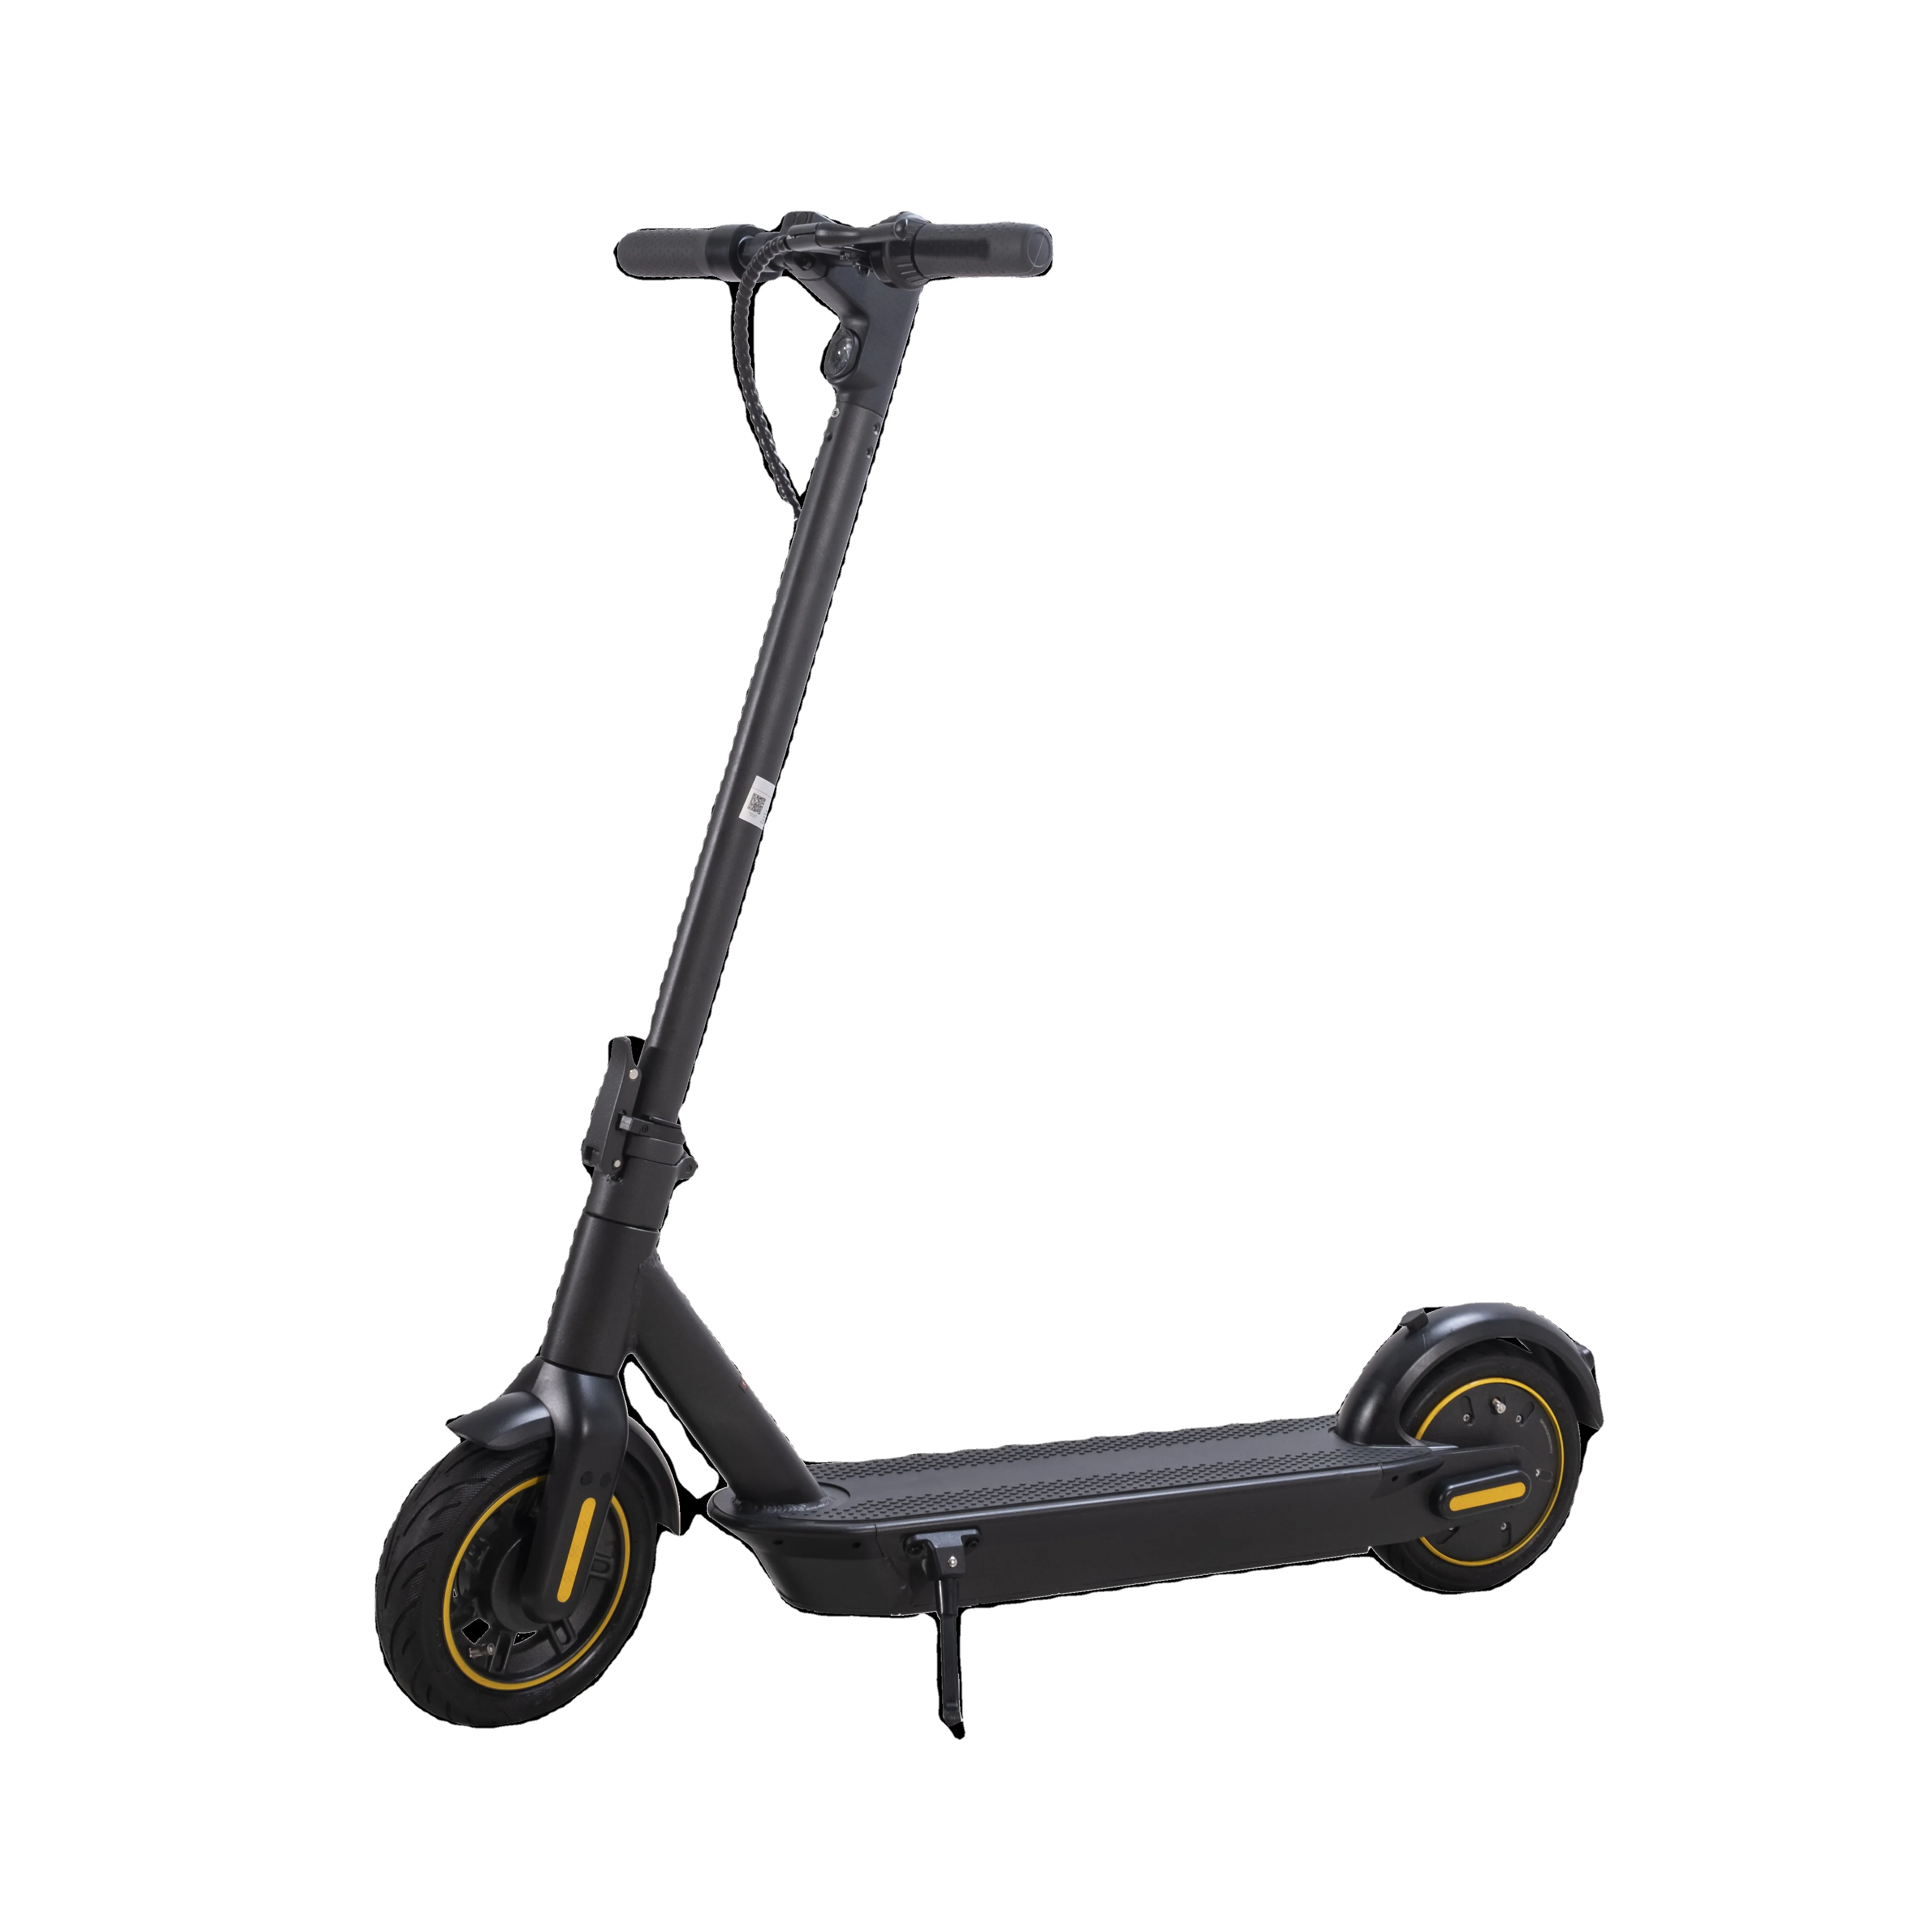 

UK EU Germany Warehouse 10Inch 350W Max Scooter Electric Long Range Folding Fast Electric Scooters For Adult Drop Shipping